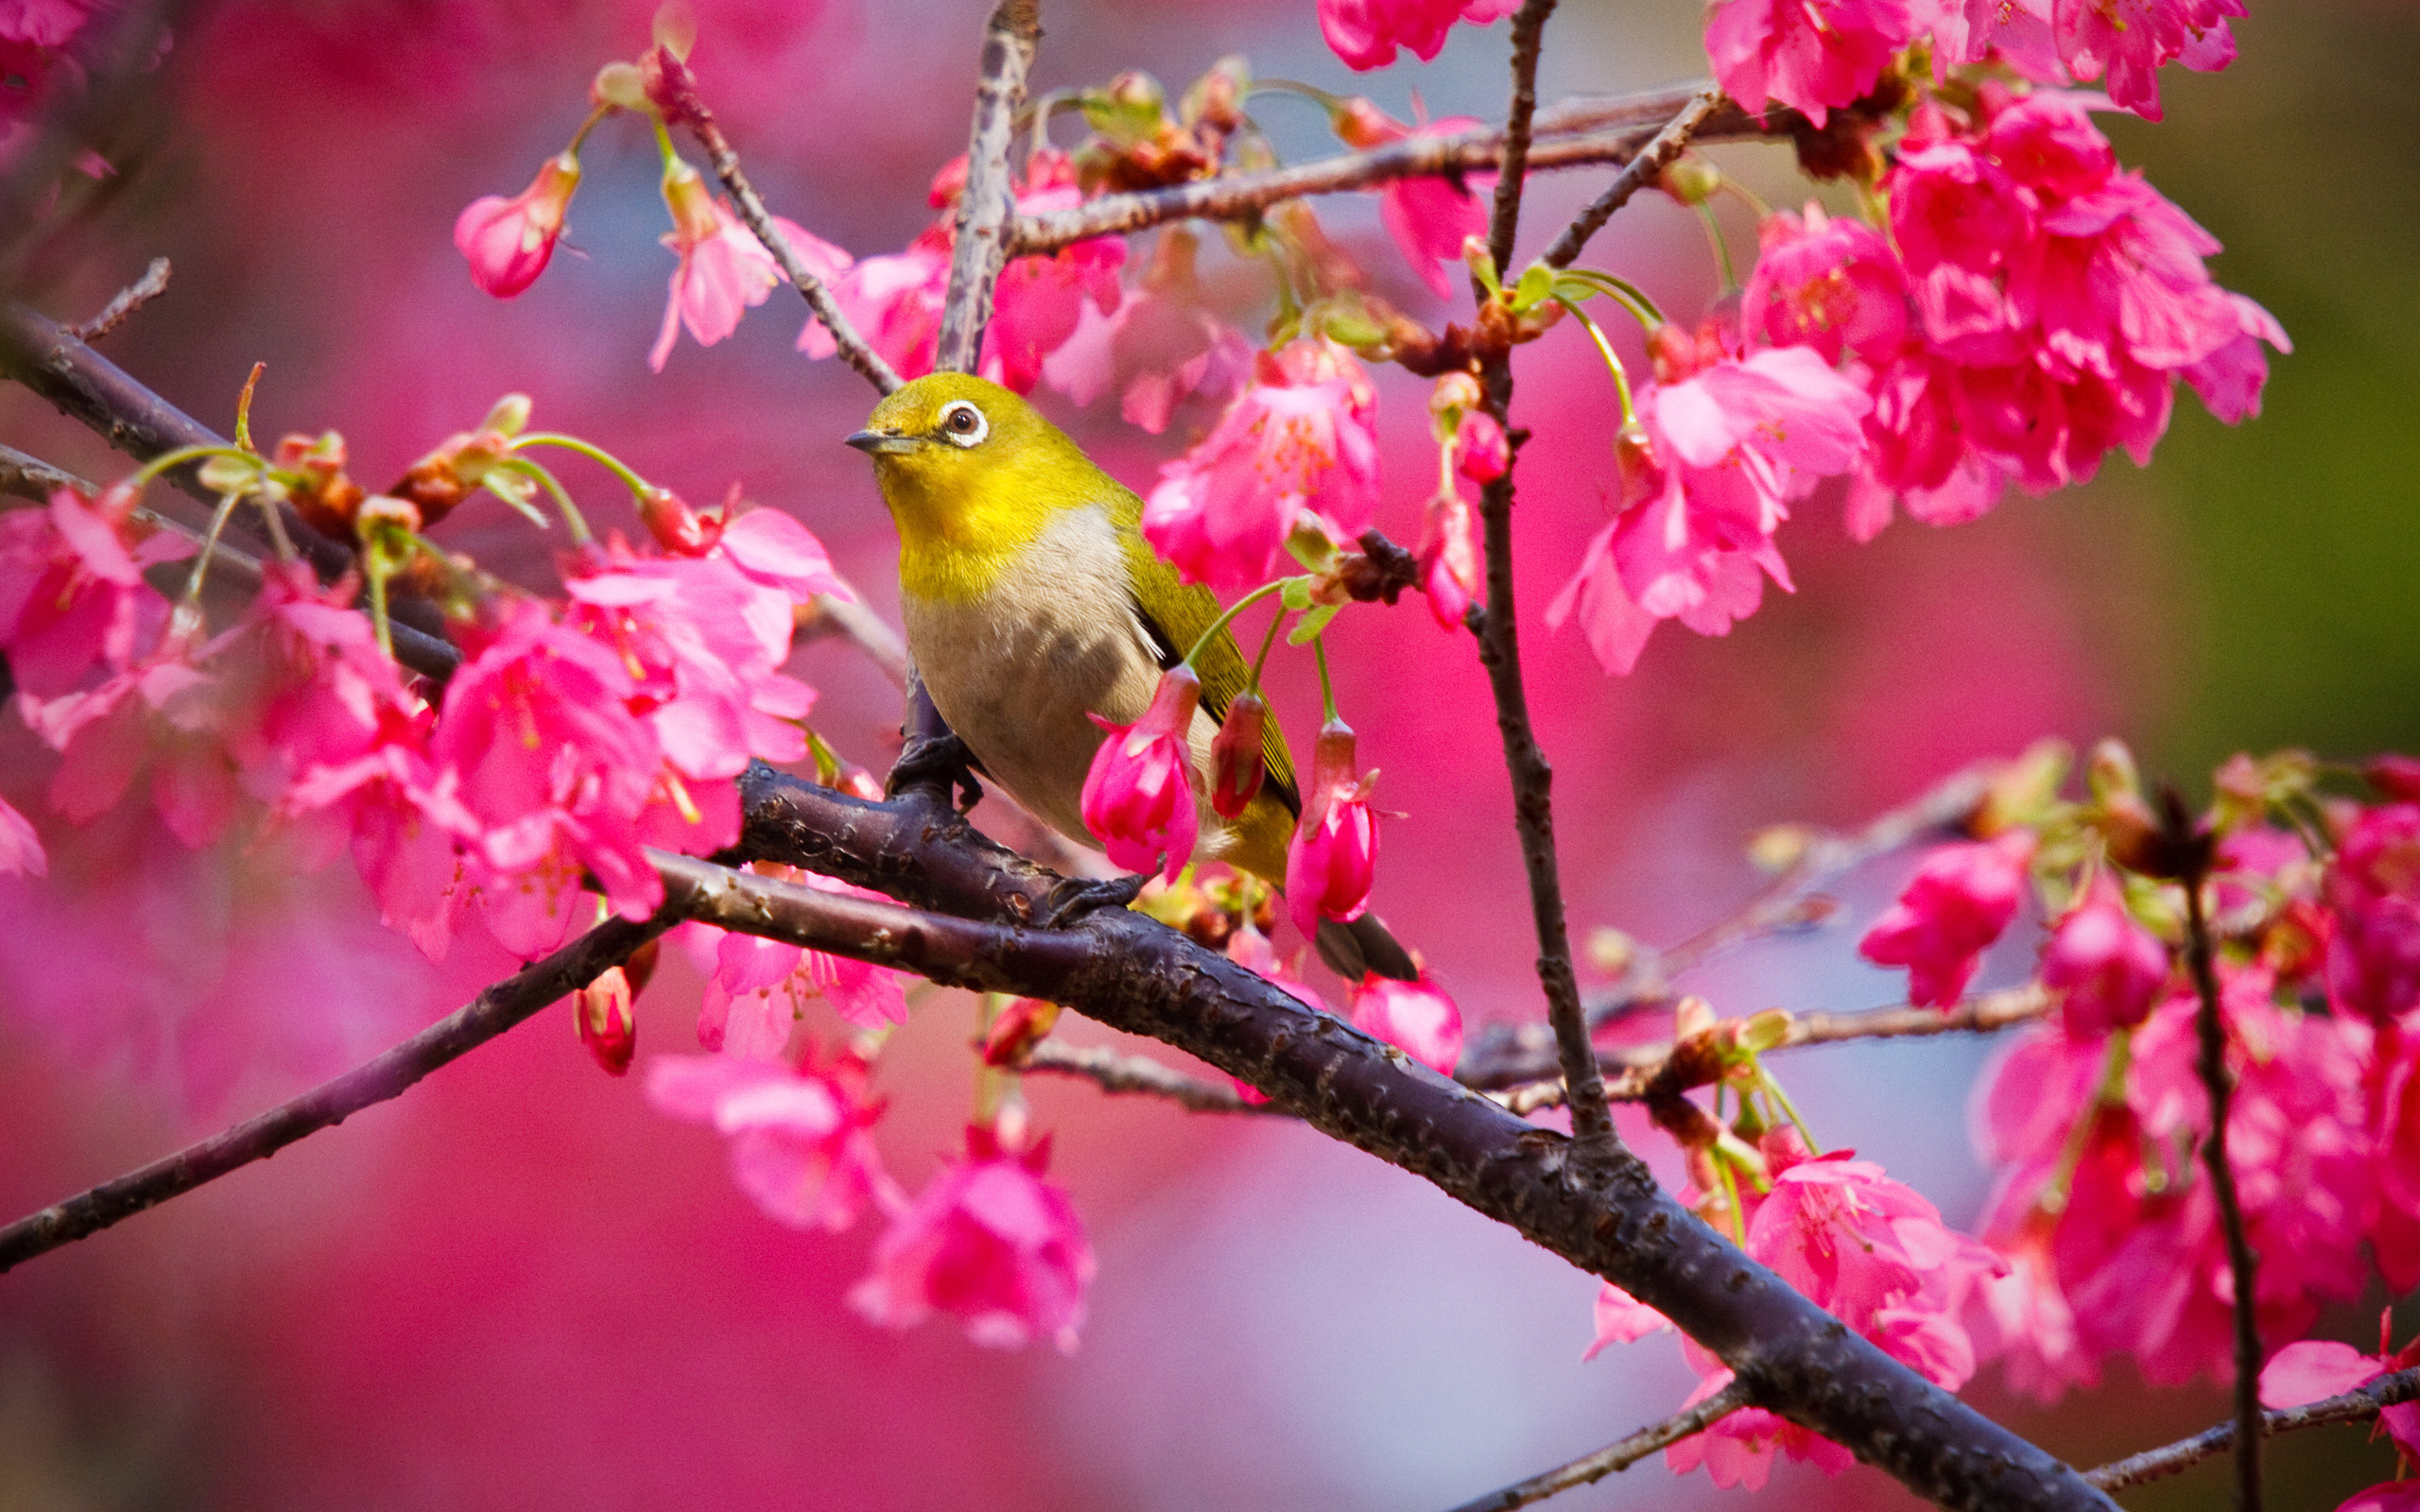 2560x1600 Pretty Wallppaer Of Animals: A Small Yellow Bird On The .